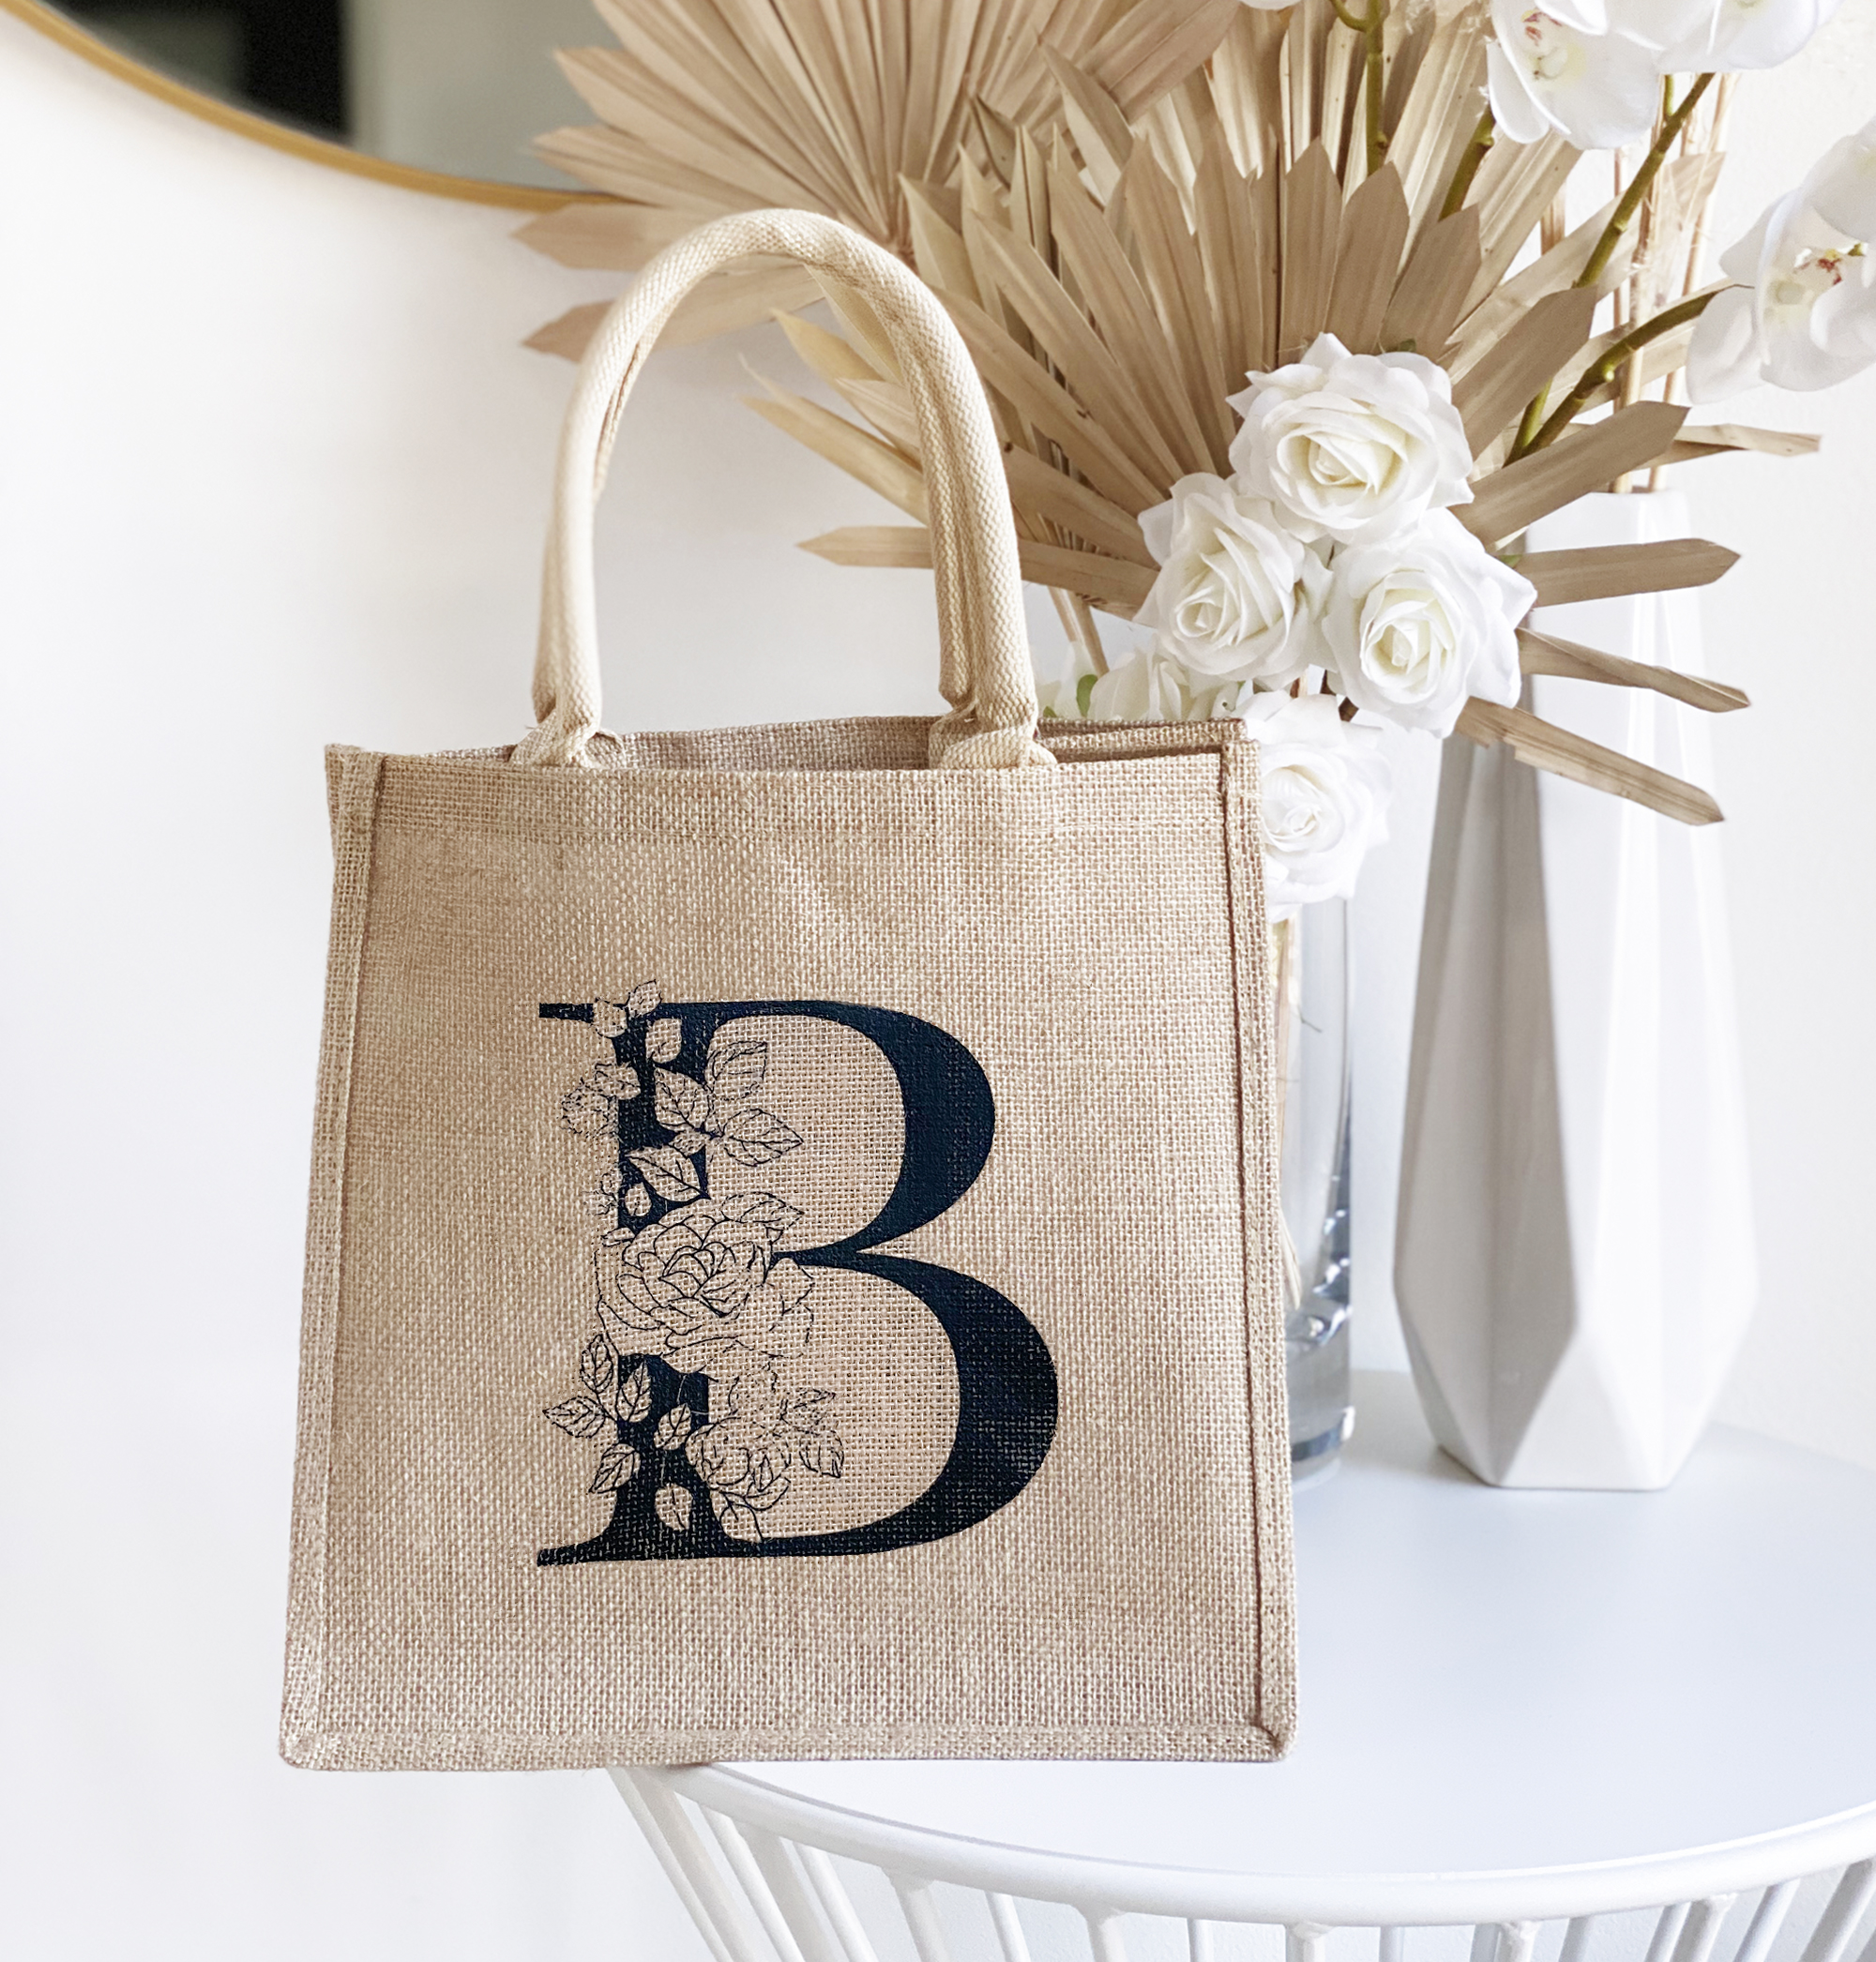 personalized tote,Personalized Burlap Bags,bridesmaid gift,boat